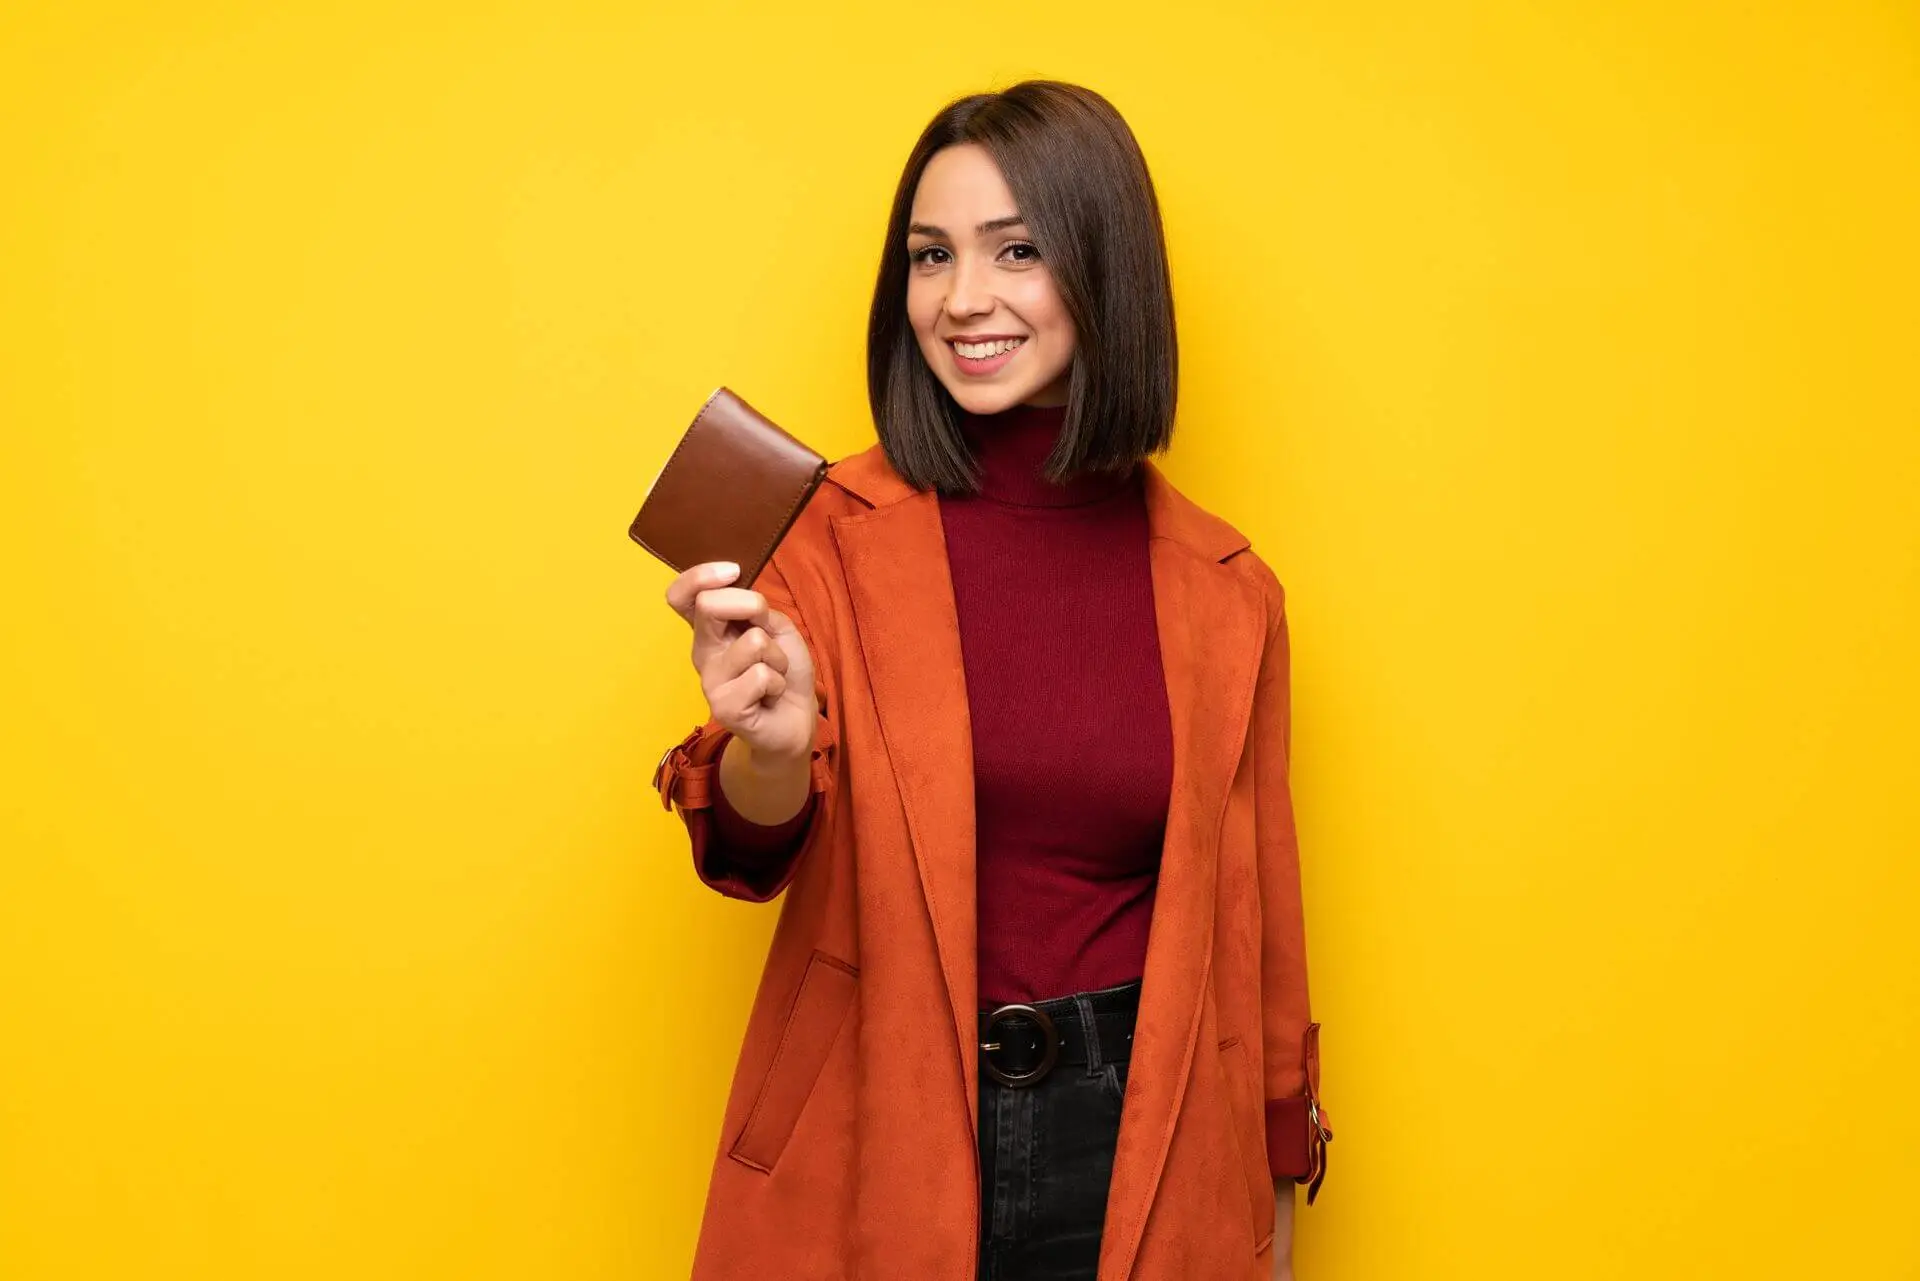 Young woman with coat holding a wallet